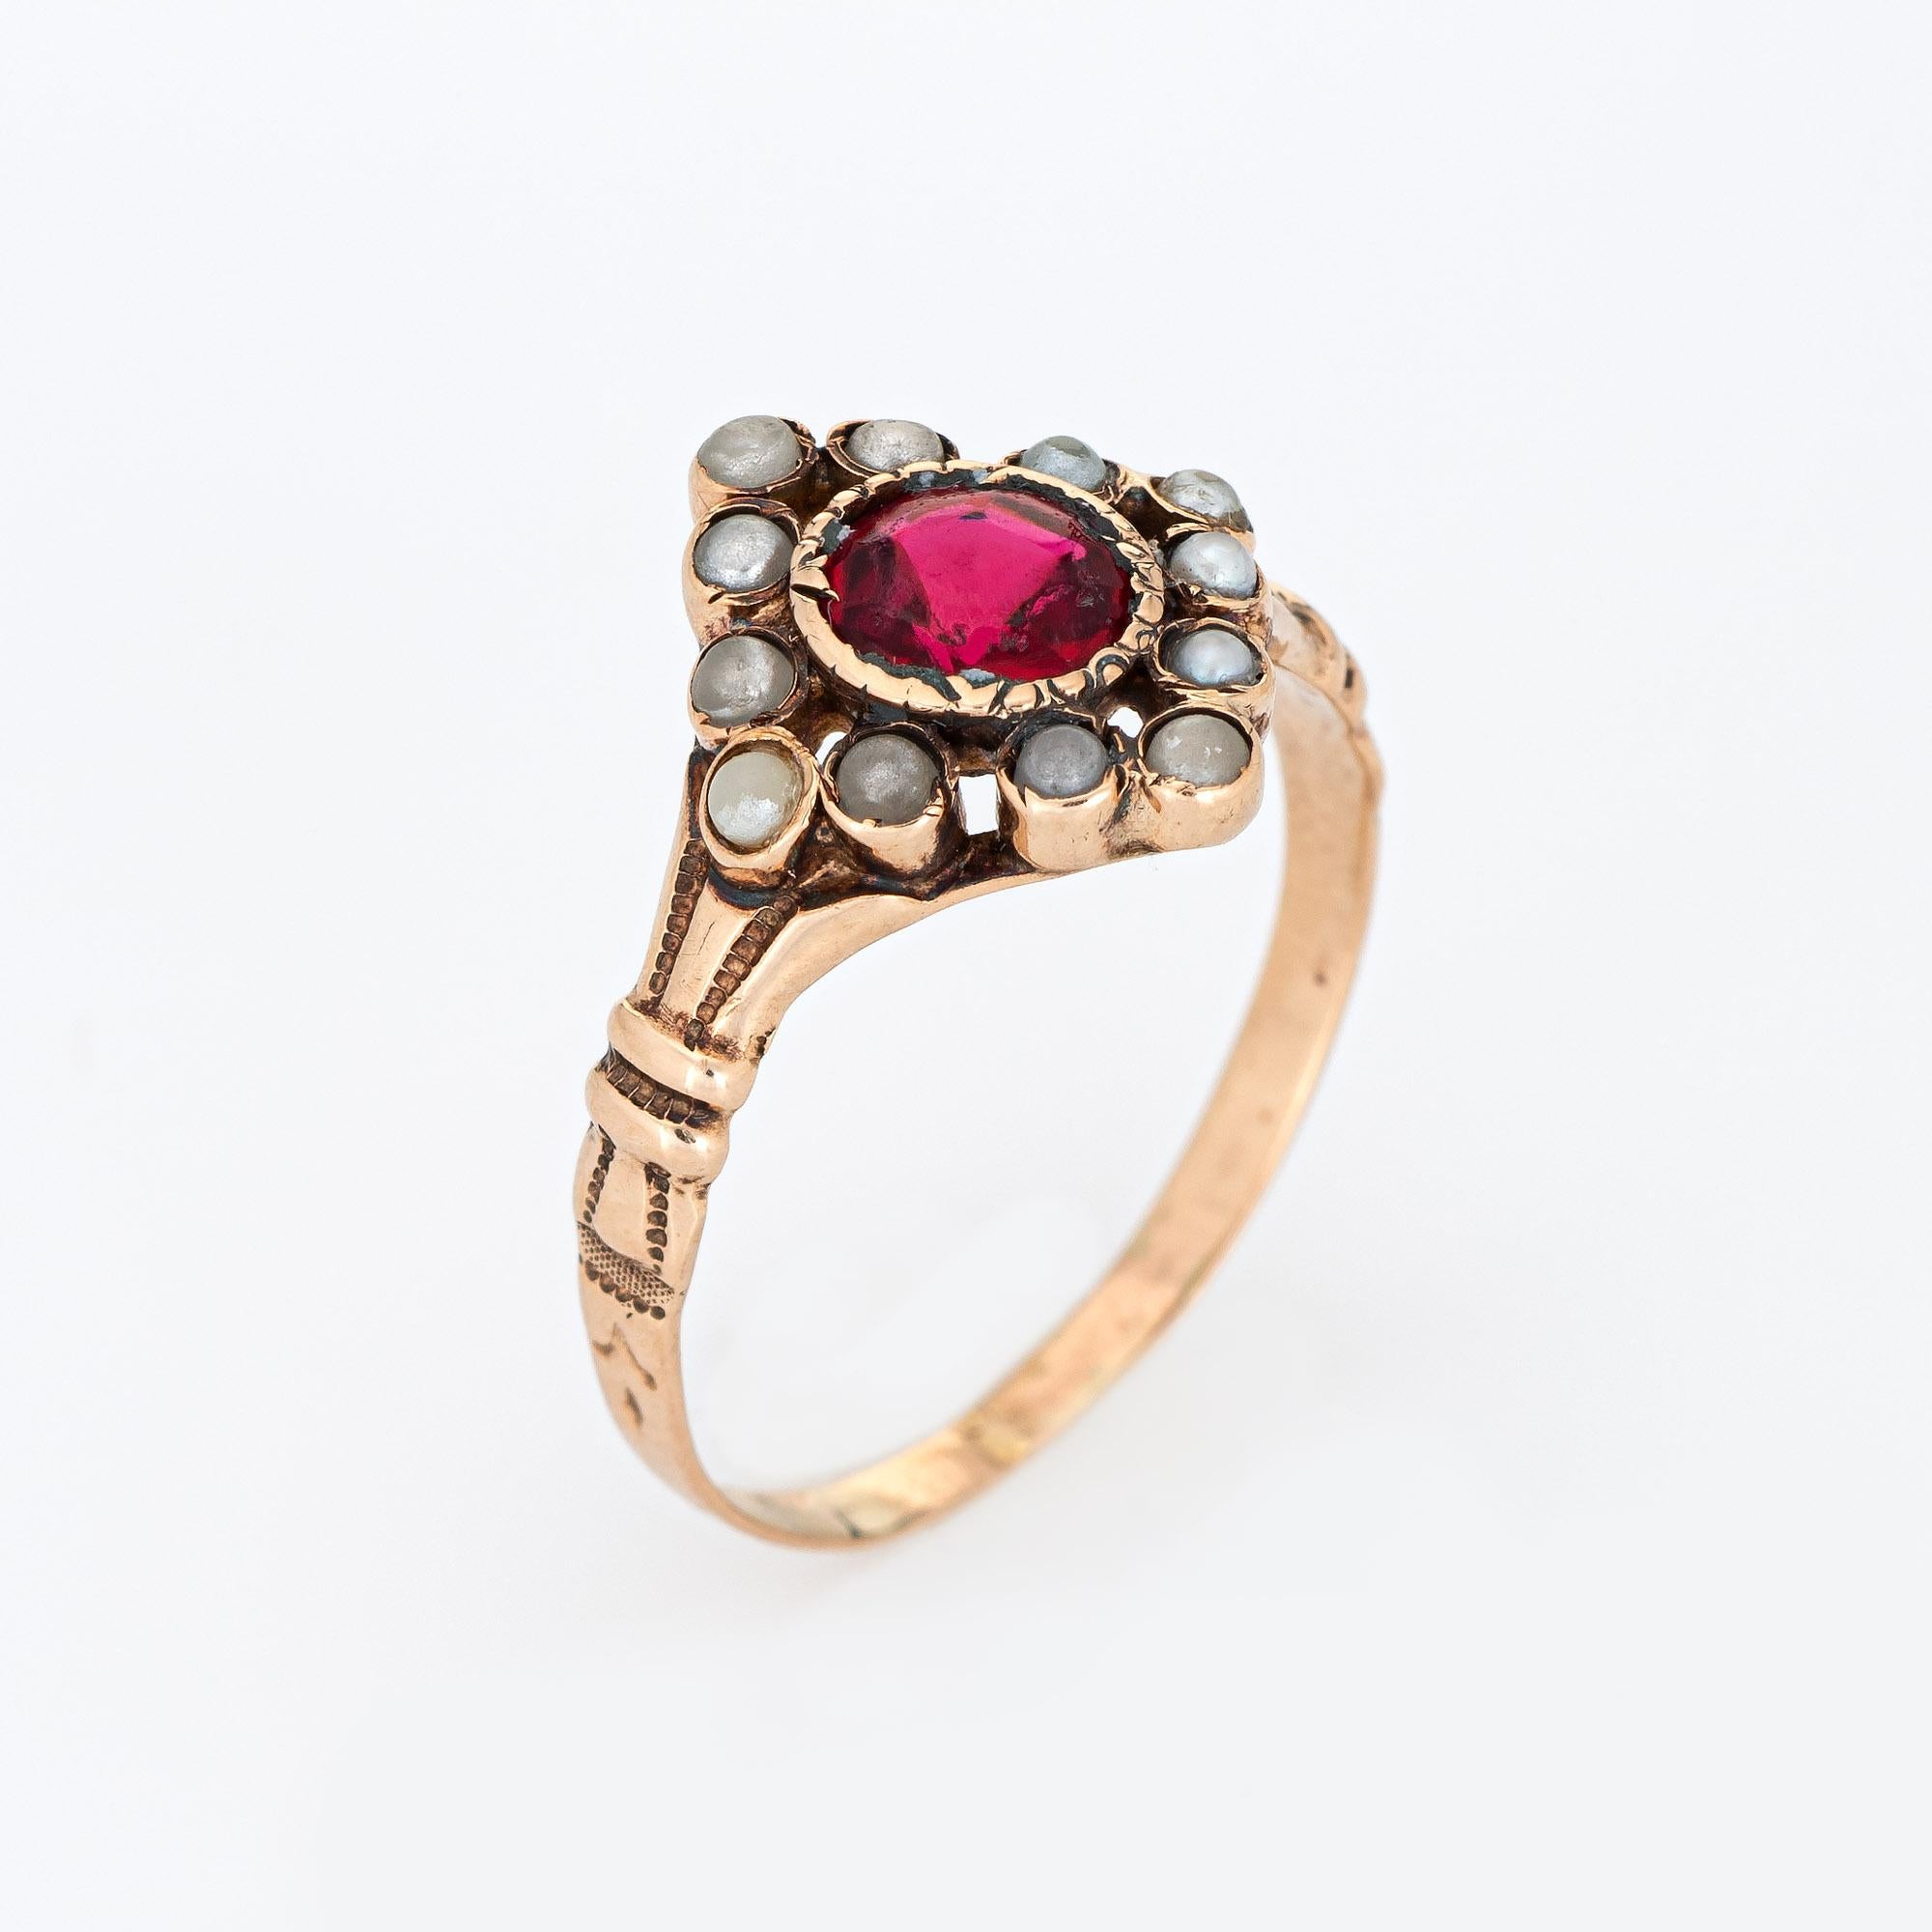 Finely detailed antique Victorian seed pearl and red paste ring (circa 1880s to 1900s), crafted in 10 karat rose gold. 

Red paste stone measures 5mm diameter, accented with 12 x 1.5mm seed pearls. Note: light surface abrasions to the red stone. 